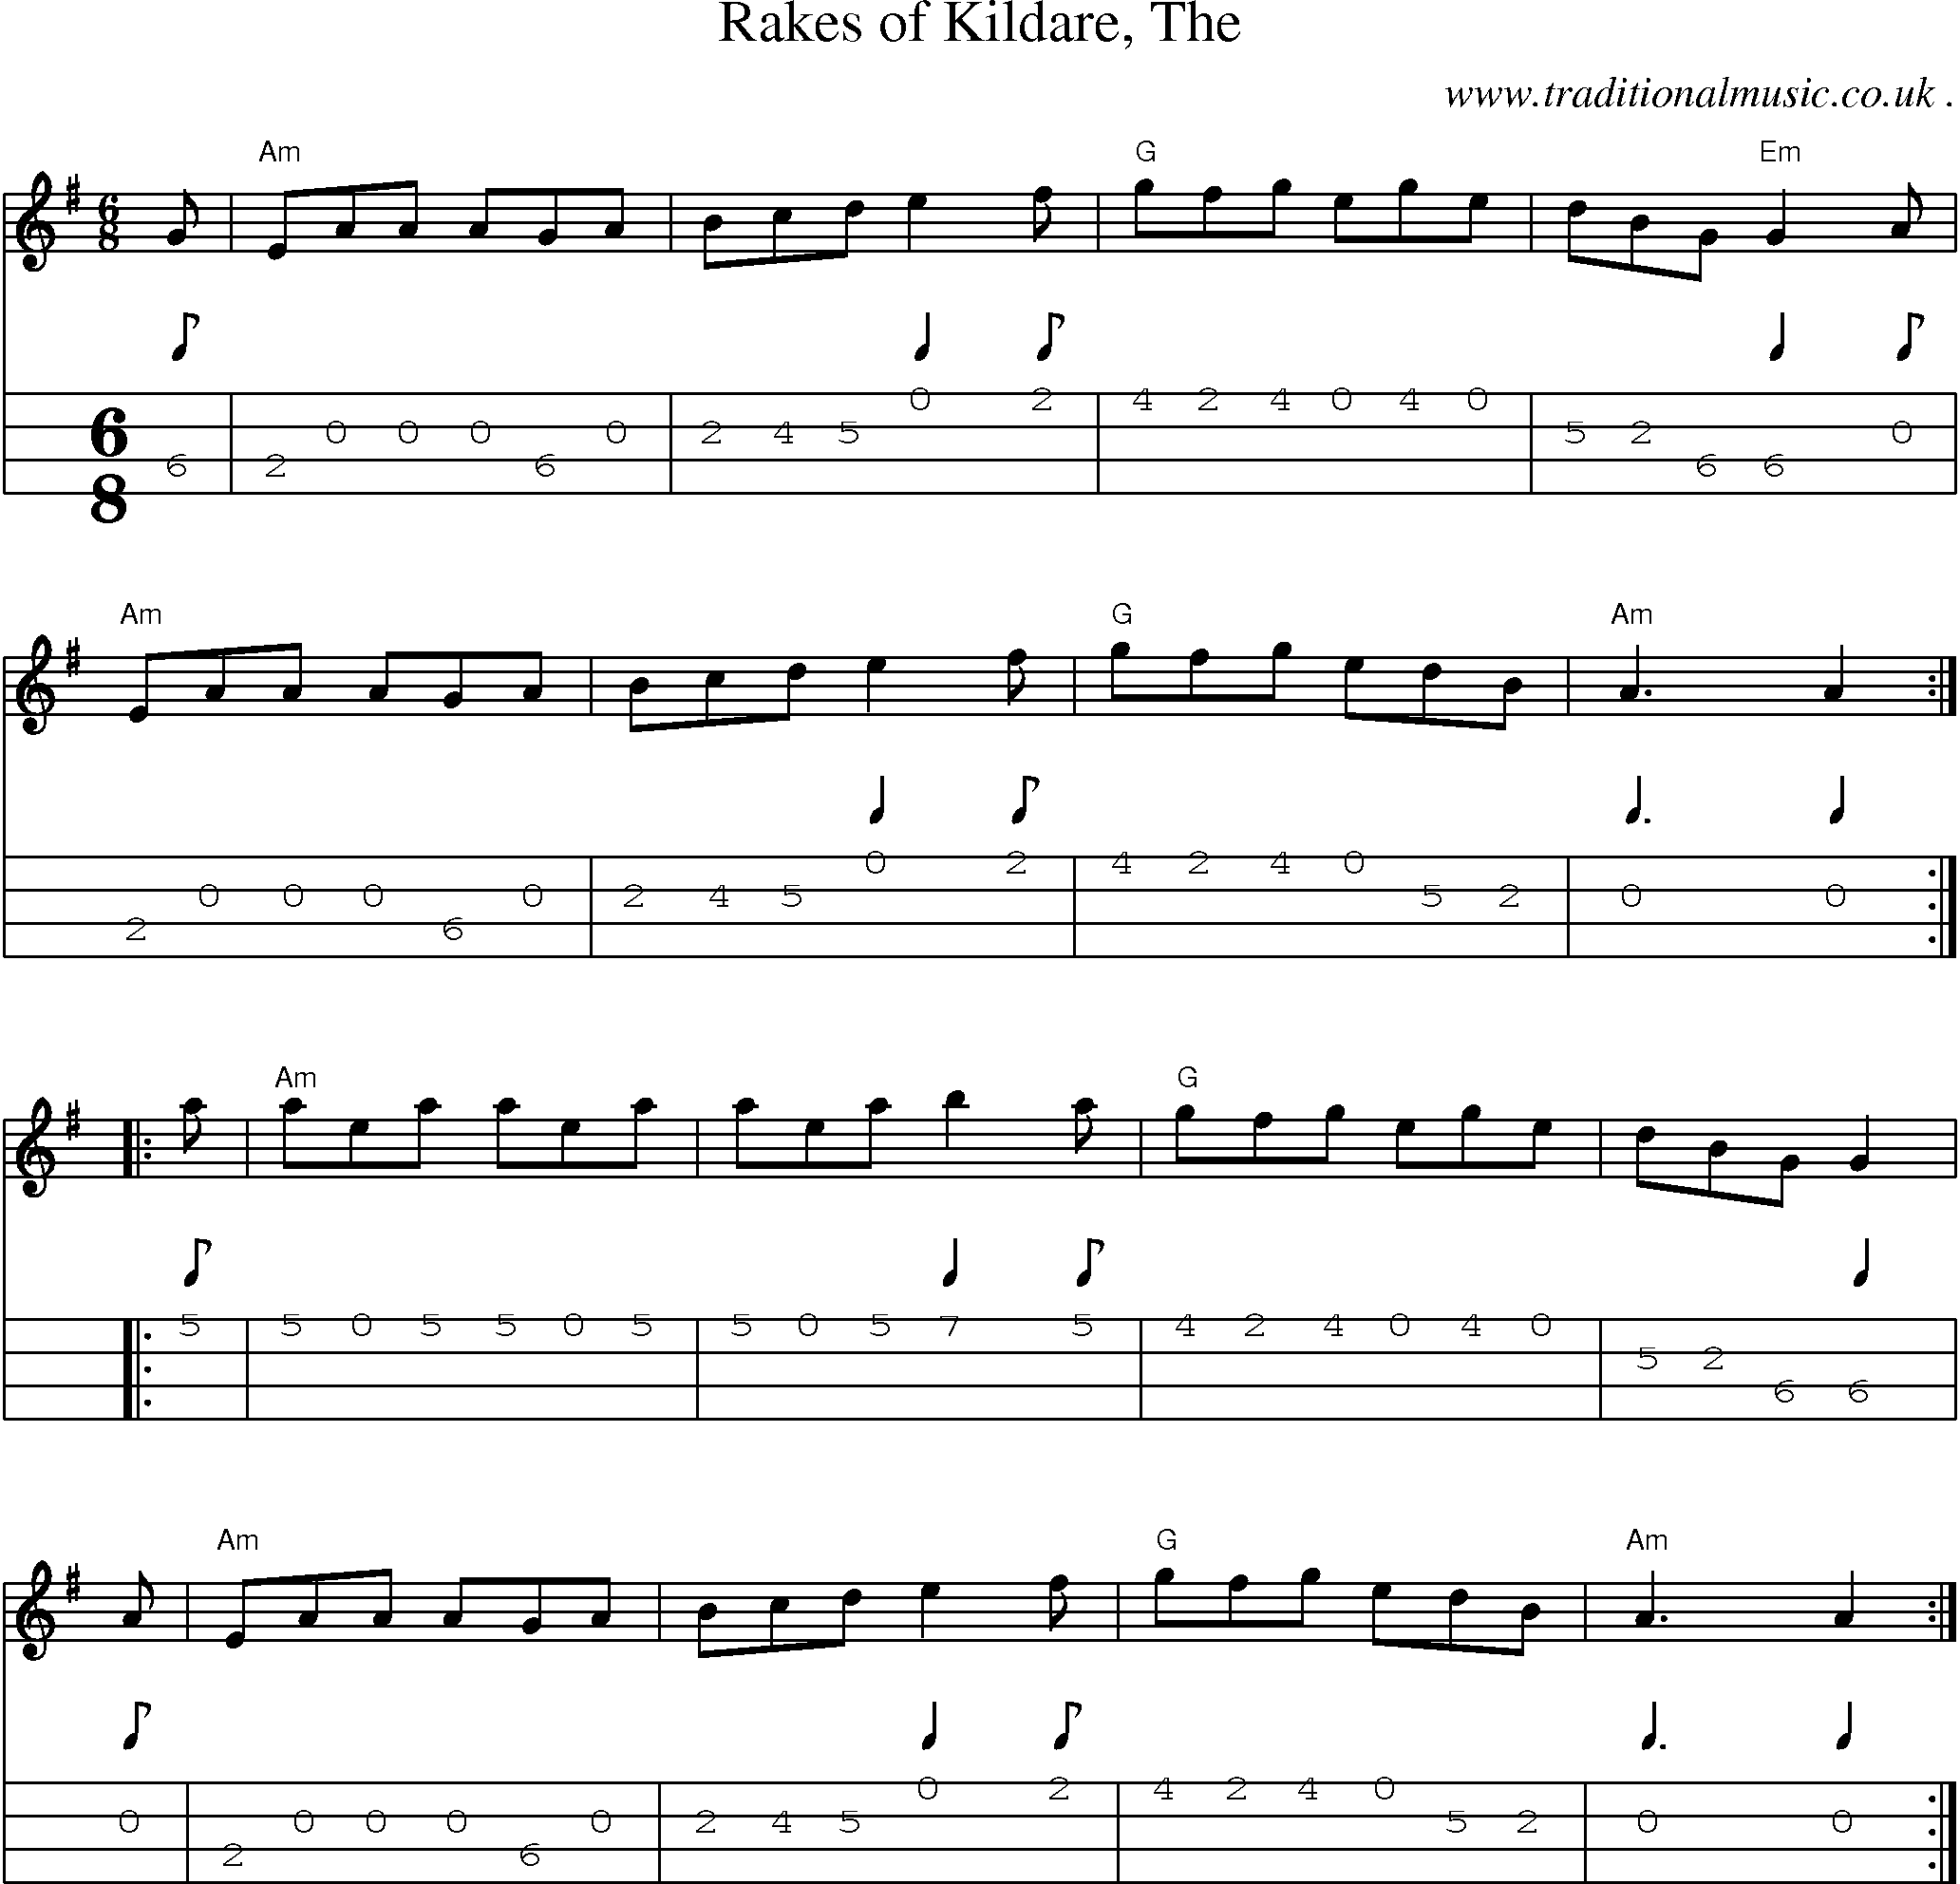 Music Score and Guitar Tabs for Rakes of Kildare The